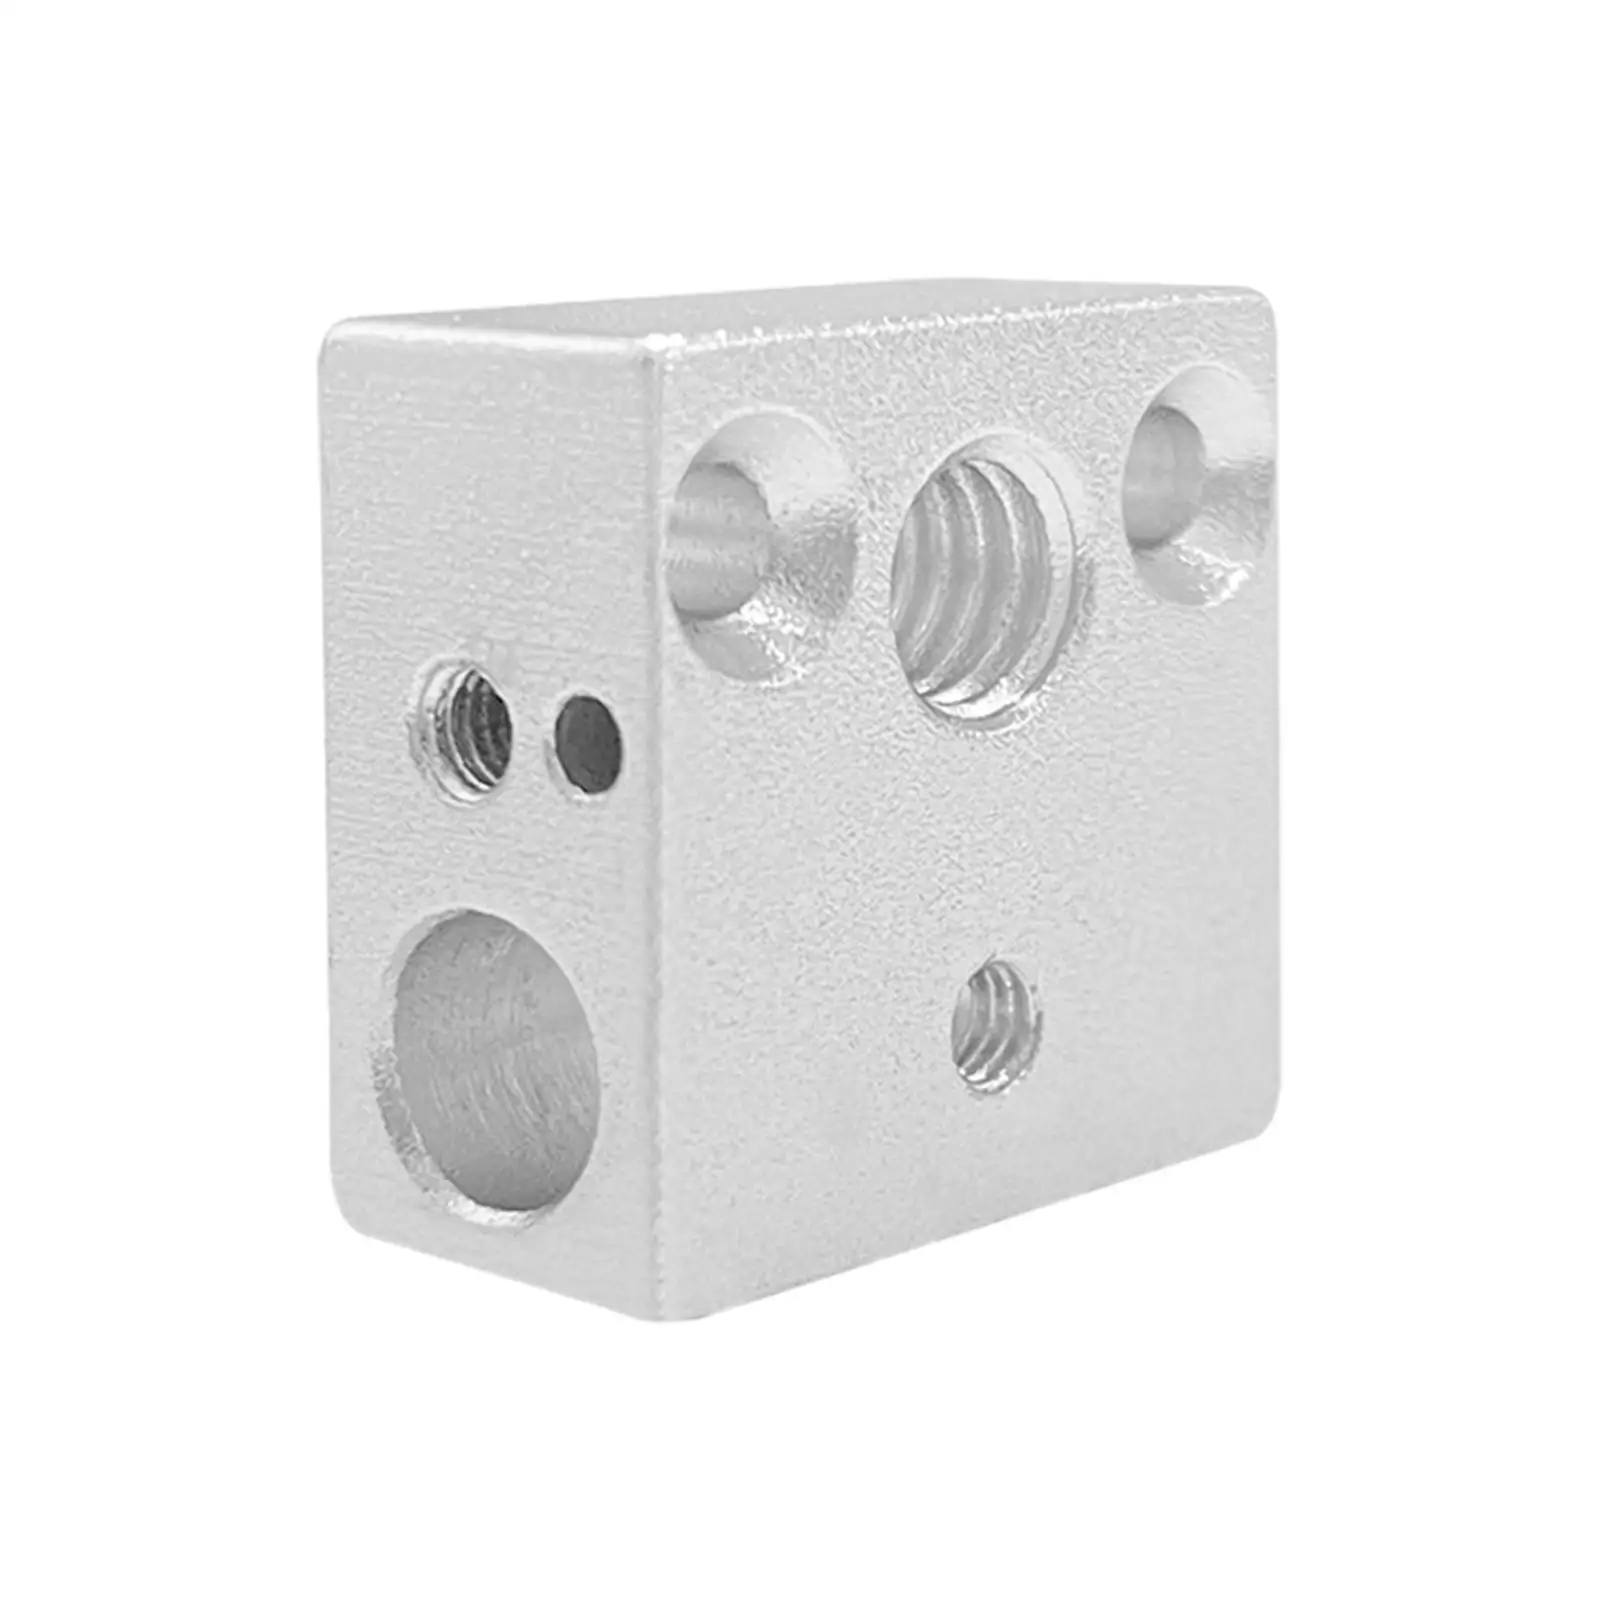 Heater Block Easy Installation Replacement Quality Professional High Temperature Alloy Heat Block for Hotend Ender5 CR10 Ender3